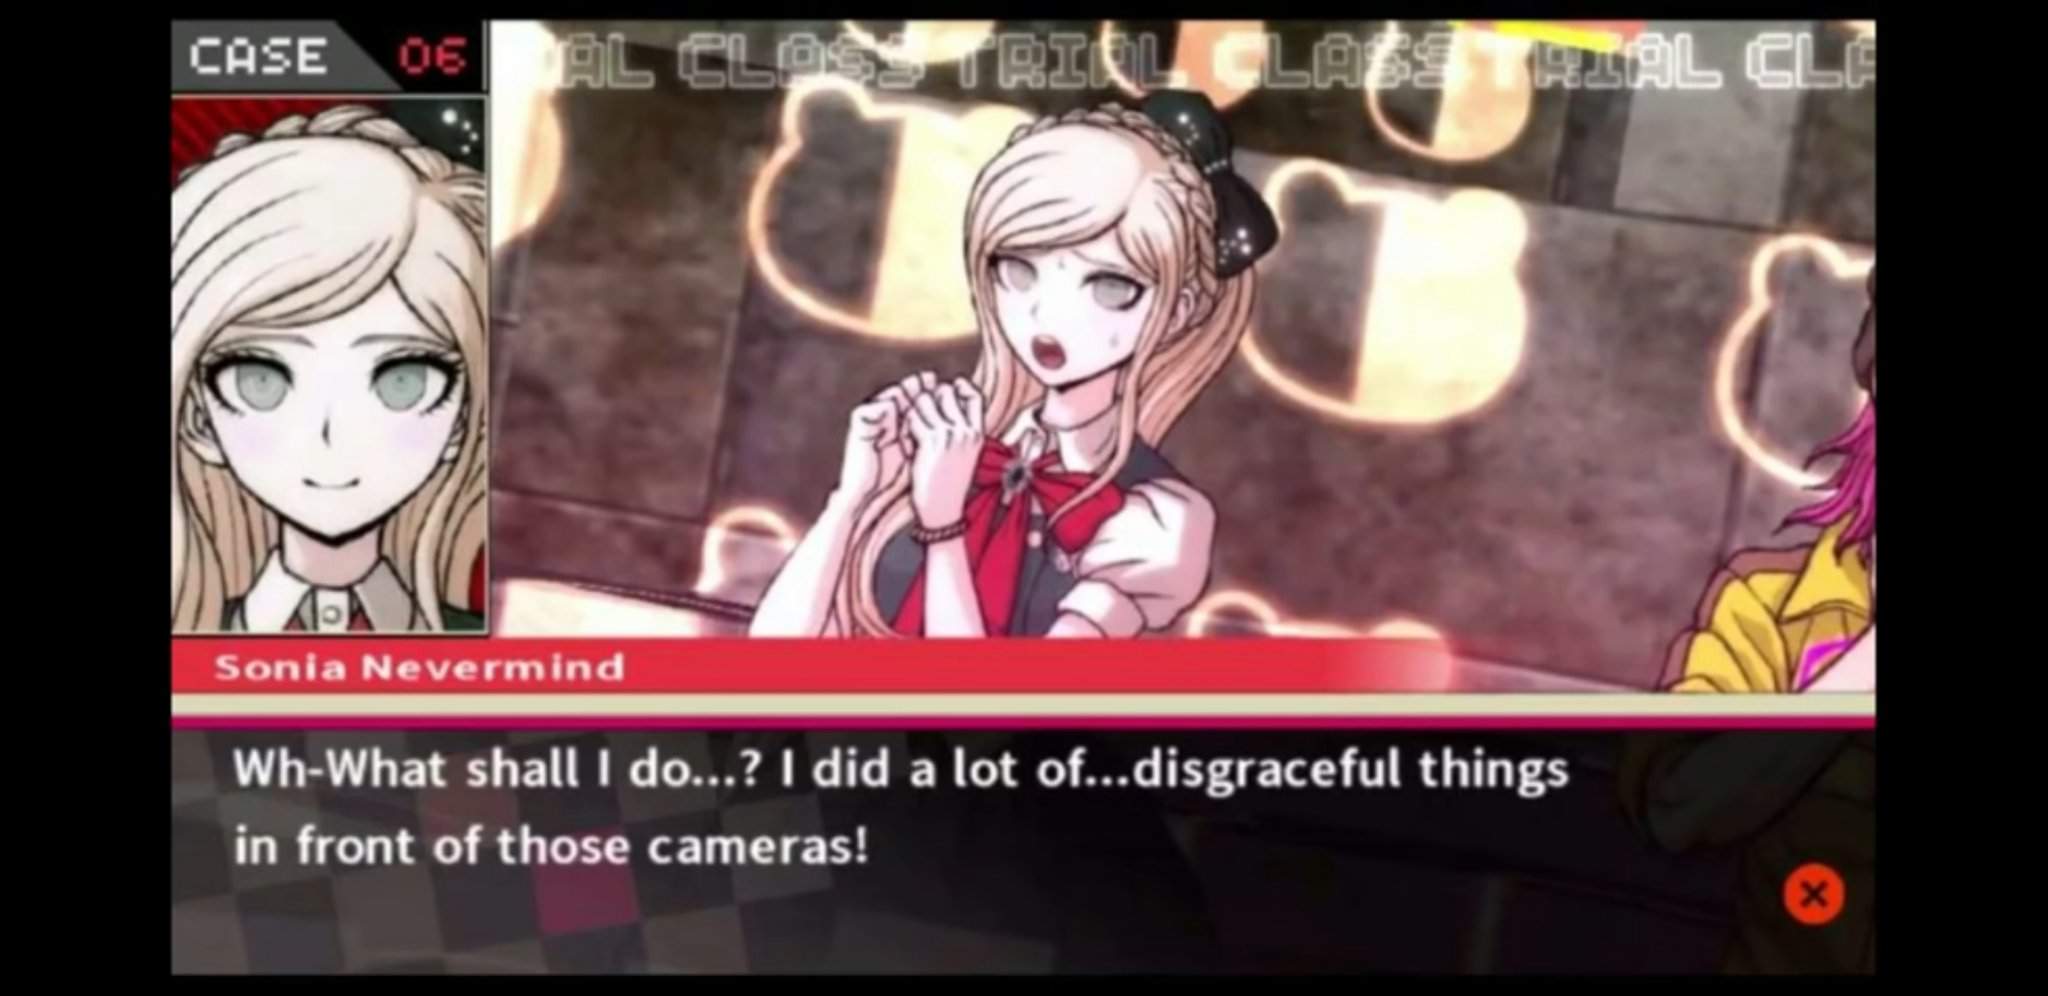 Cursed Danganronpa Dialogue Spoilers I Guess Not Really Though Danganronpa Amino View and download this 450x3038 super danganronpa 2 image with 155 favorites, or browse the gallery. amino apps